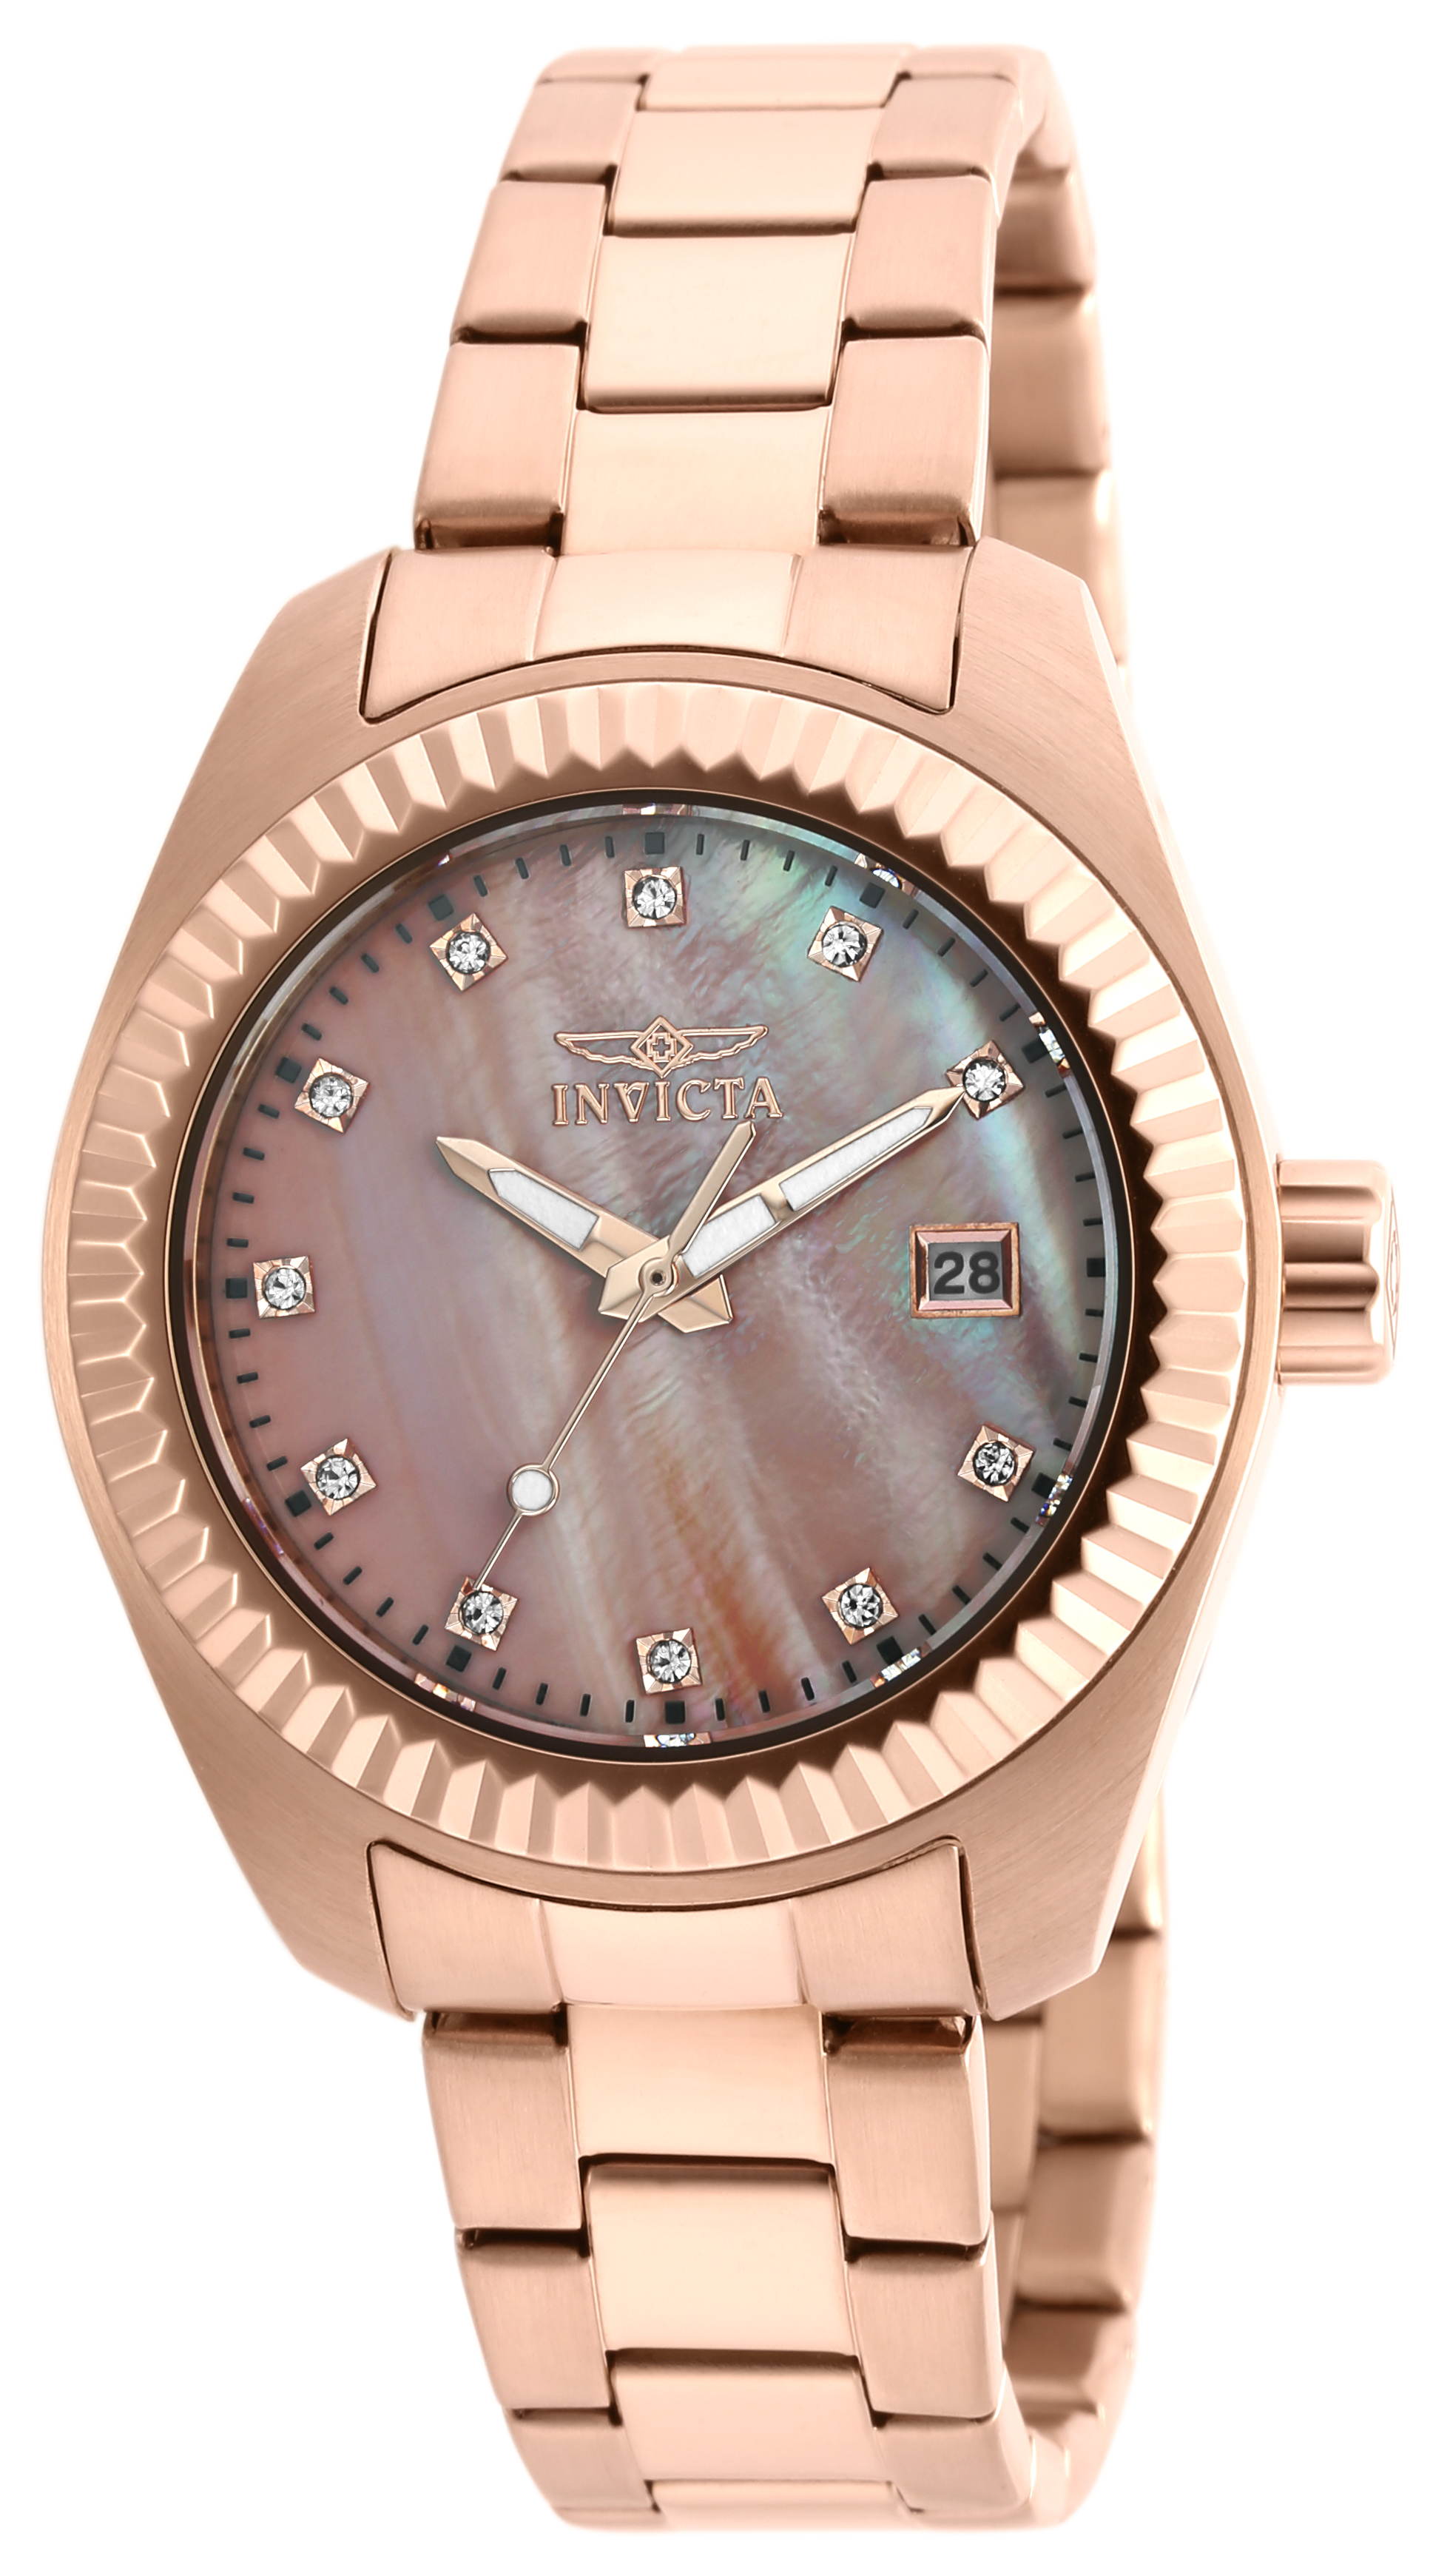 Invicta Specialty Women's Watch - 38mm, Rose Gold (20353)